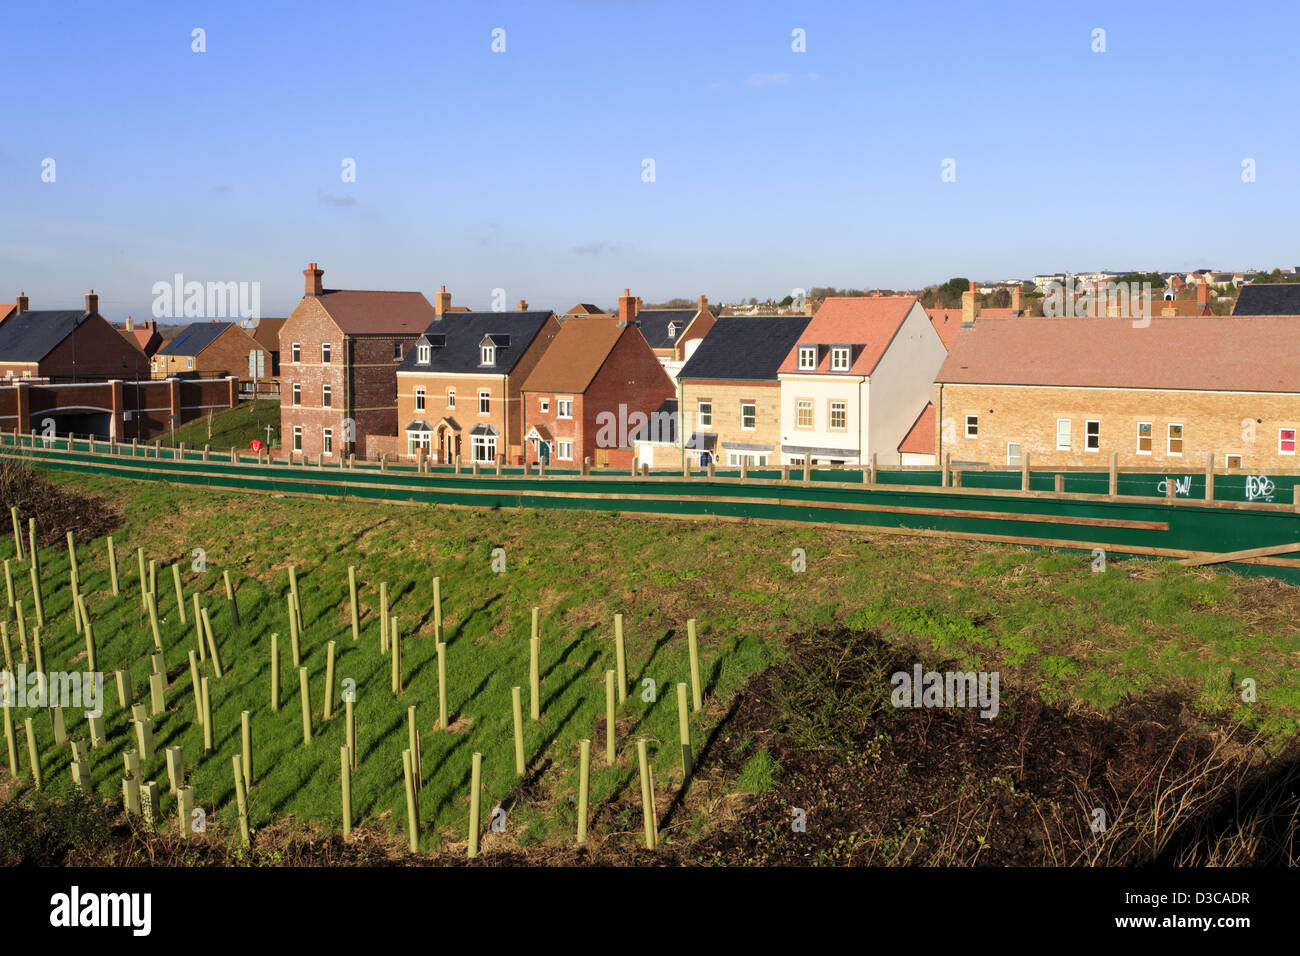 Brand new houses by an embankment with trees planted for noise reduction Stock Photo